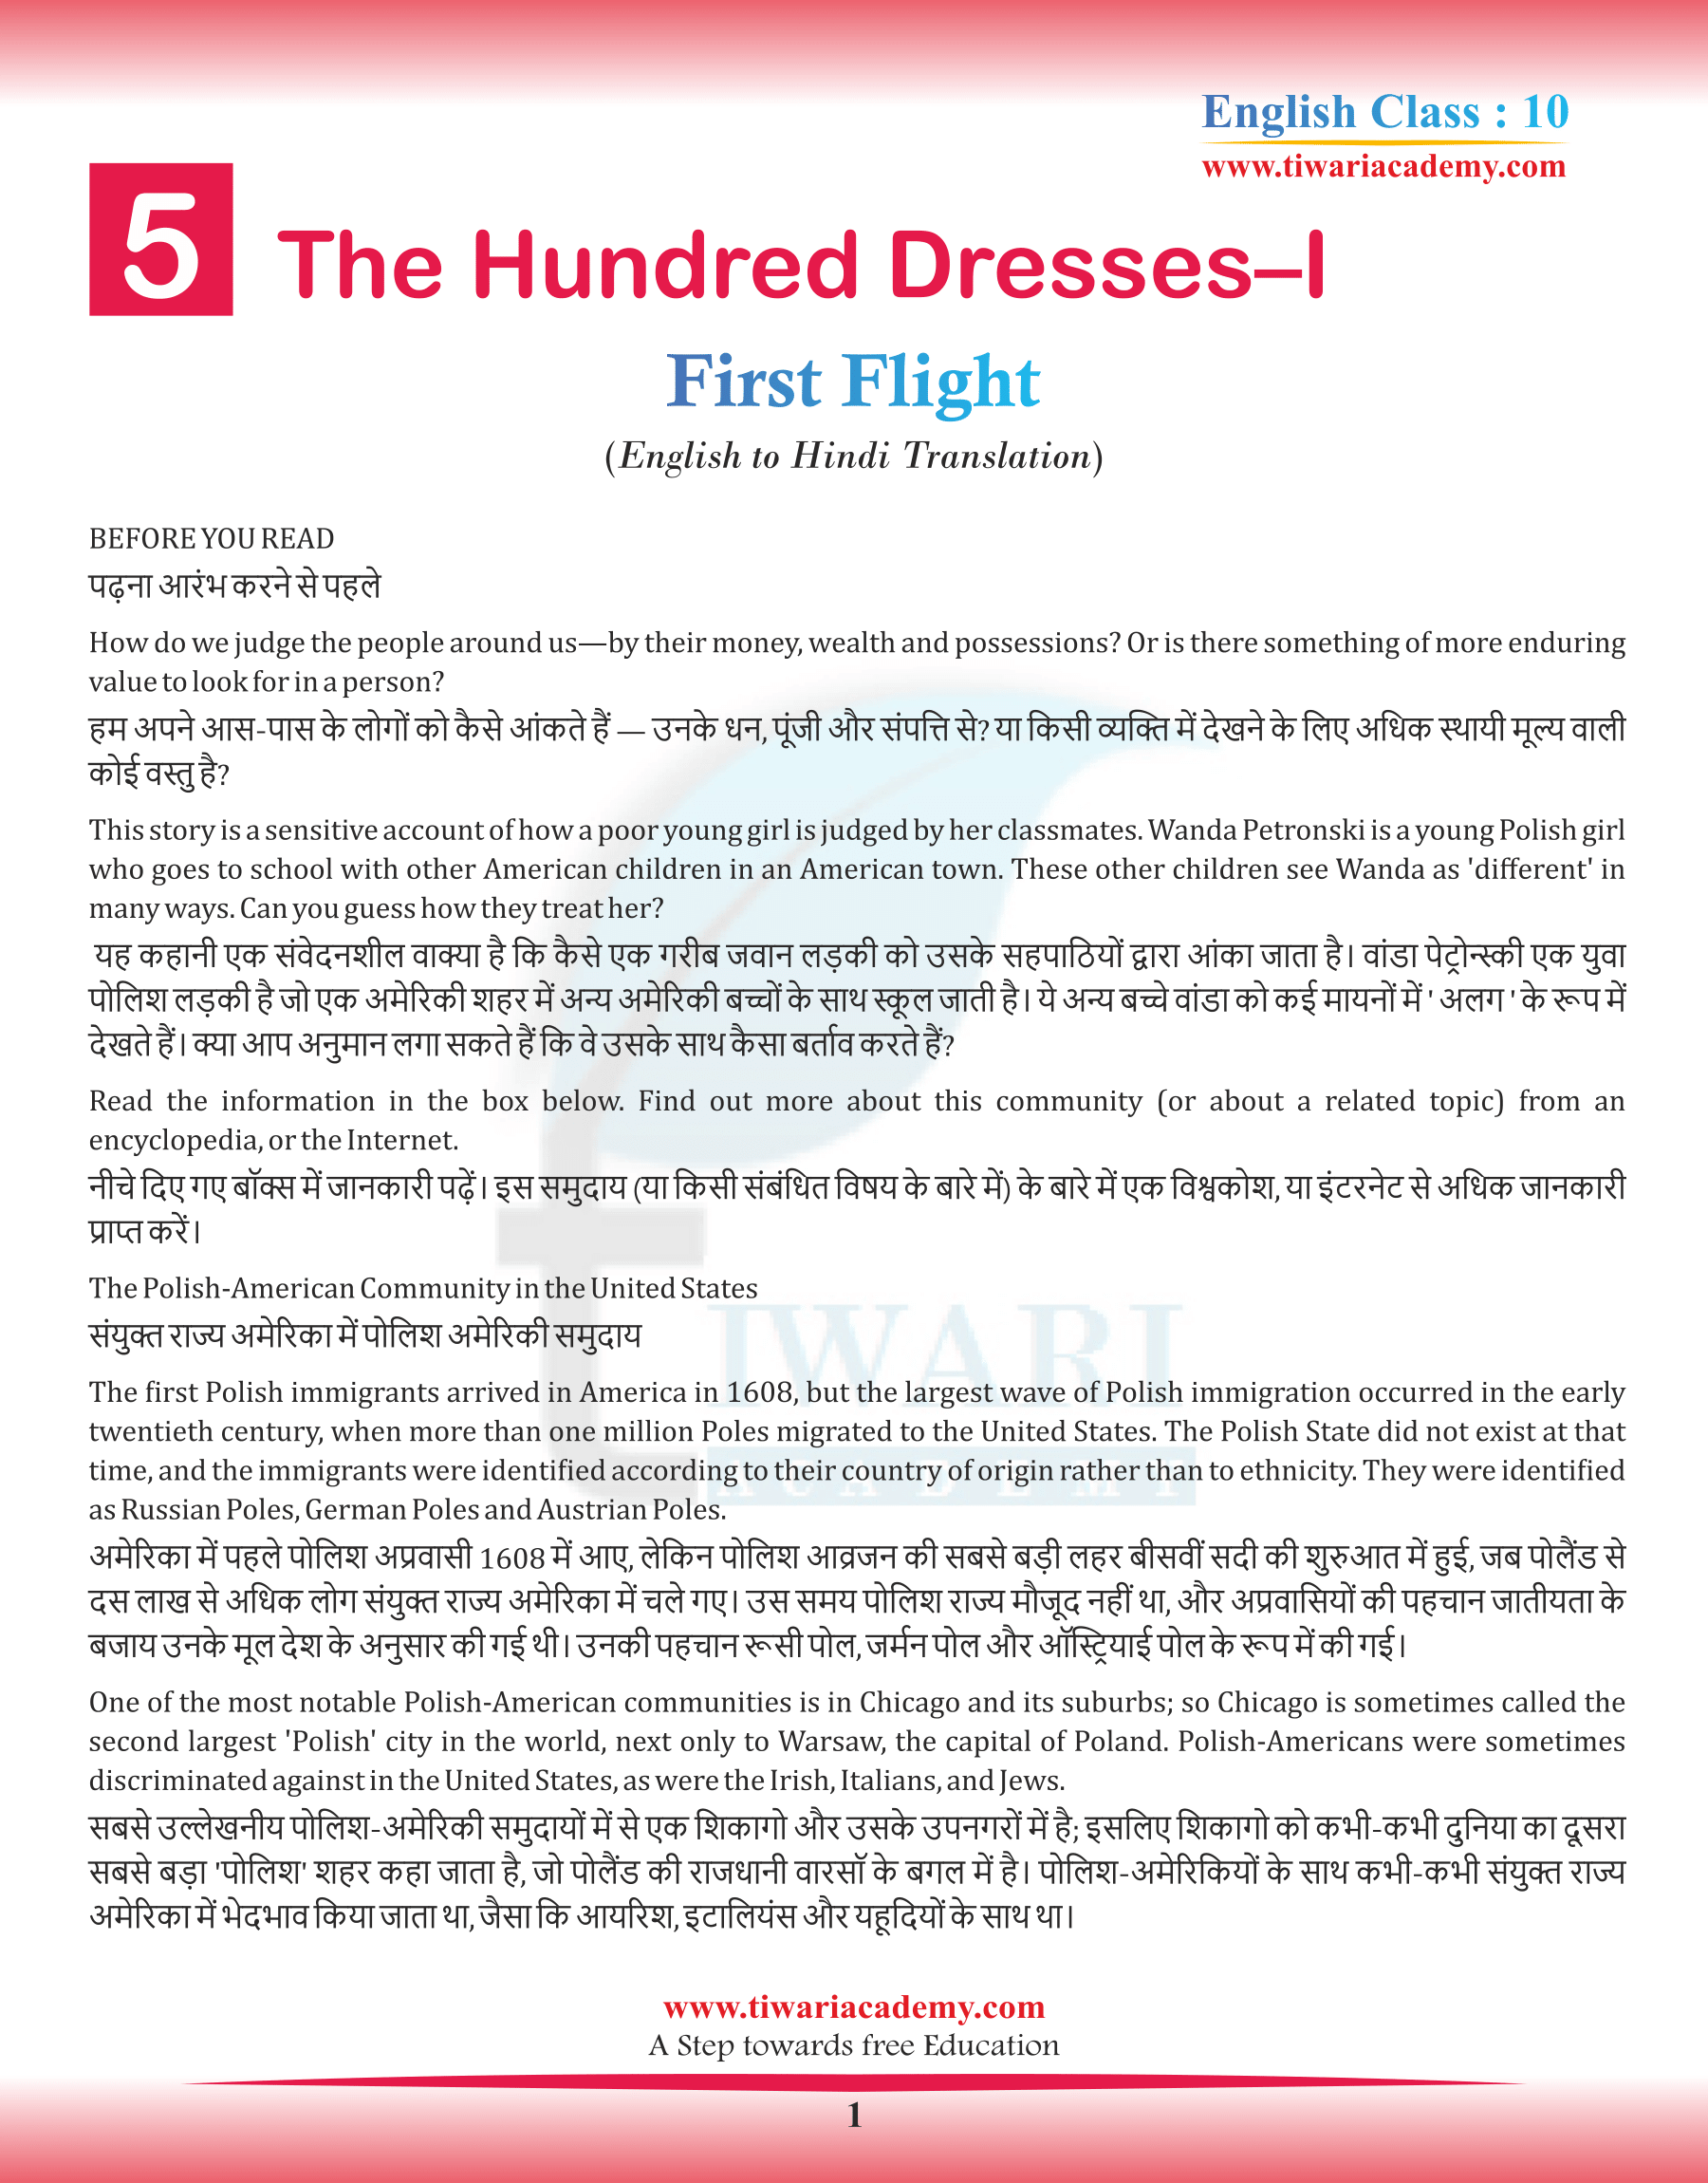 Class 10 English First Flight Chapter 5 The Hundred Dresses – I in Hindi